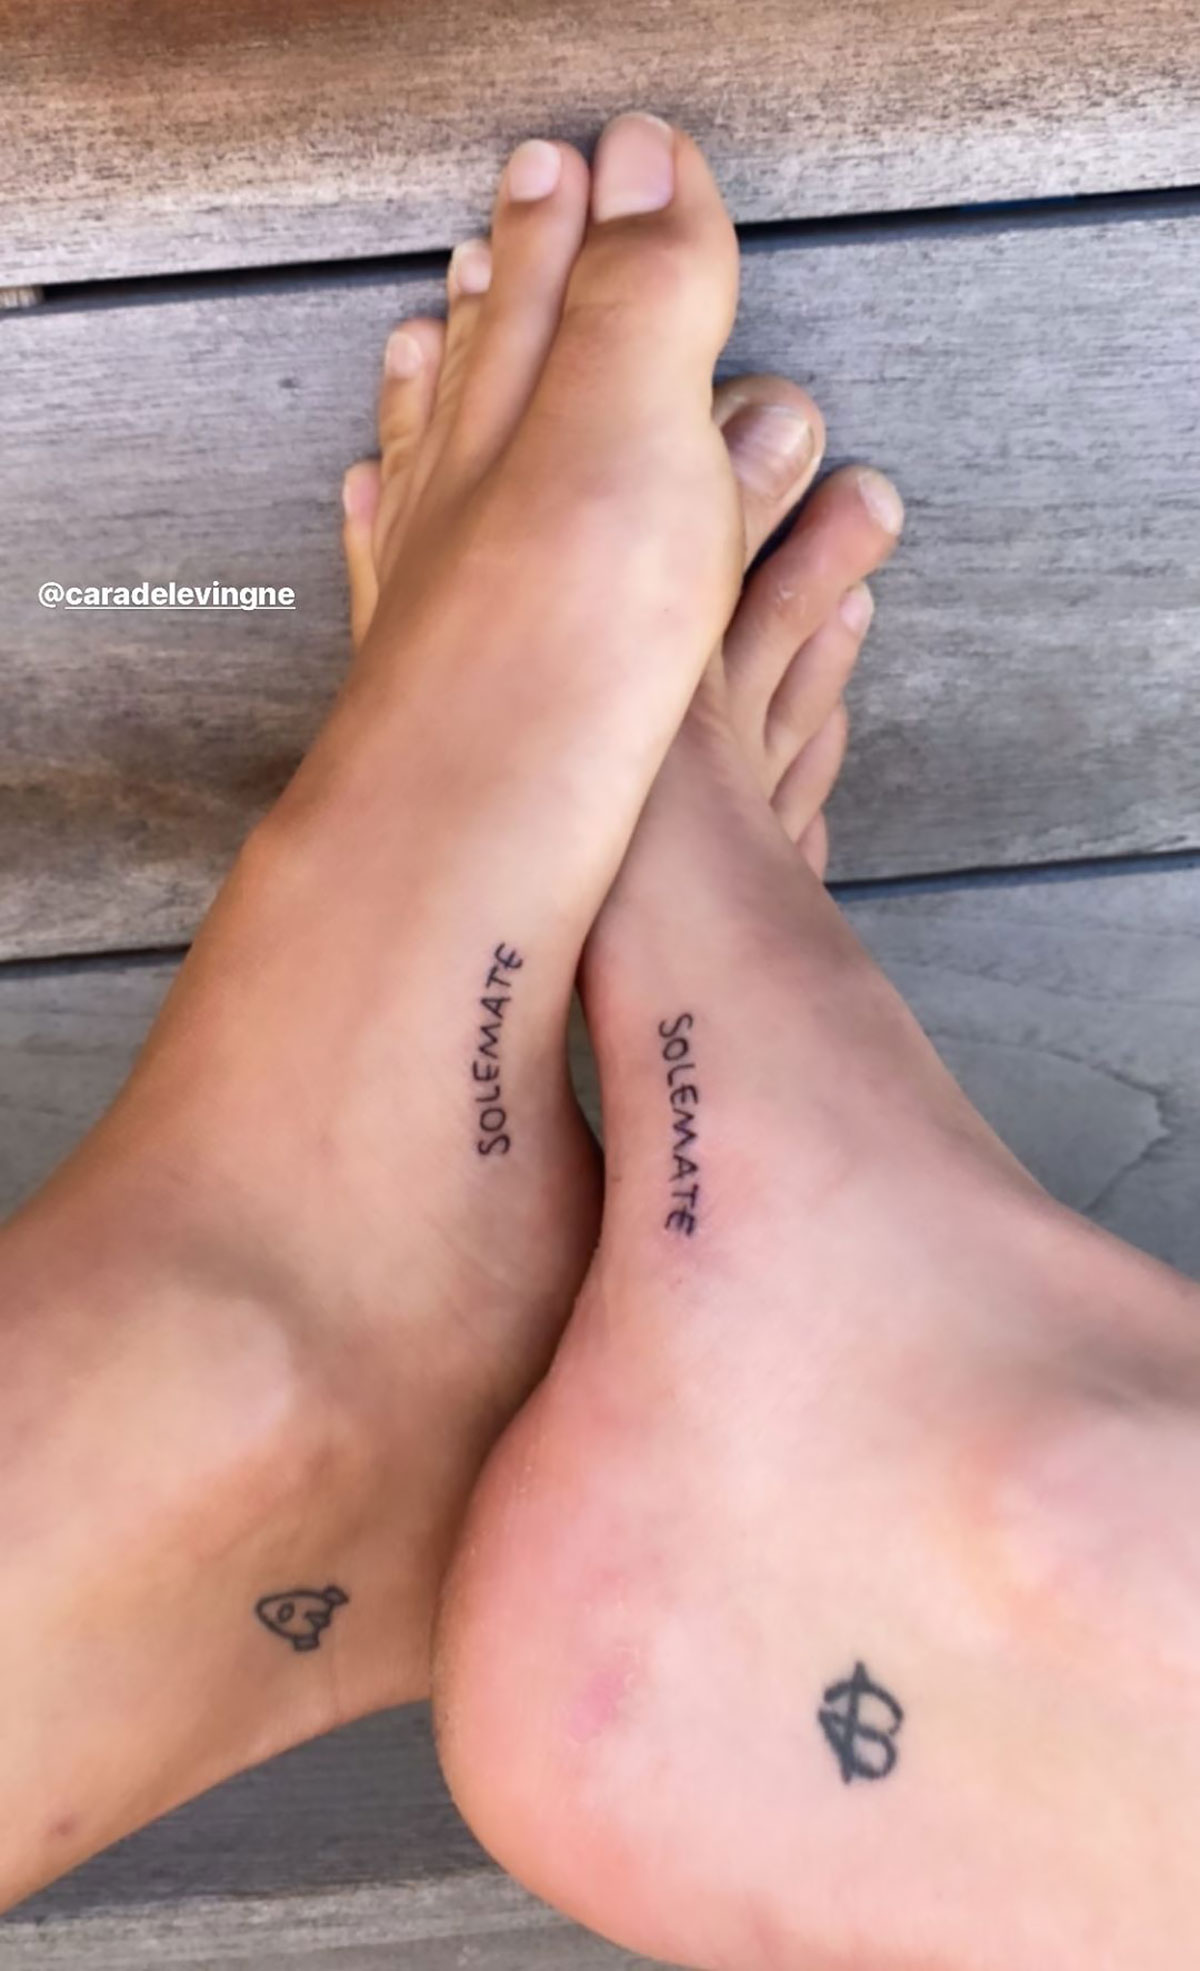 Couple Tattoos for the Much in Love Soulmates Its not as difficult as You  Think  Wedding Planning and Ideas  Wedding Blog